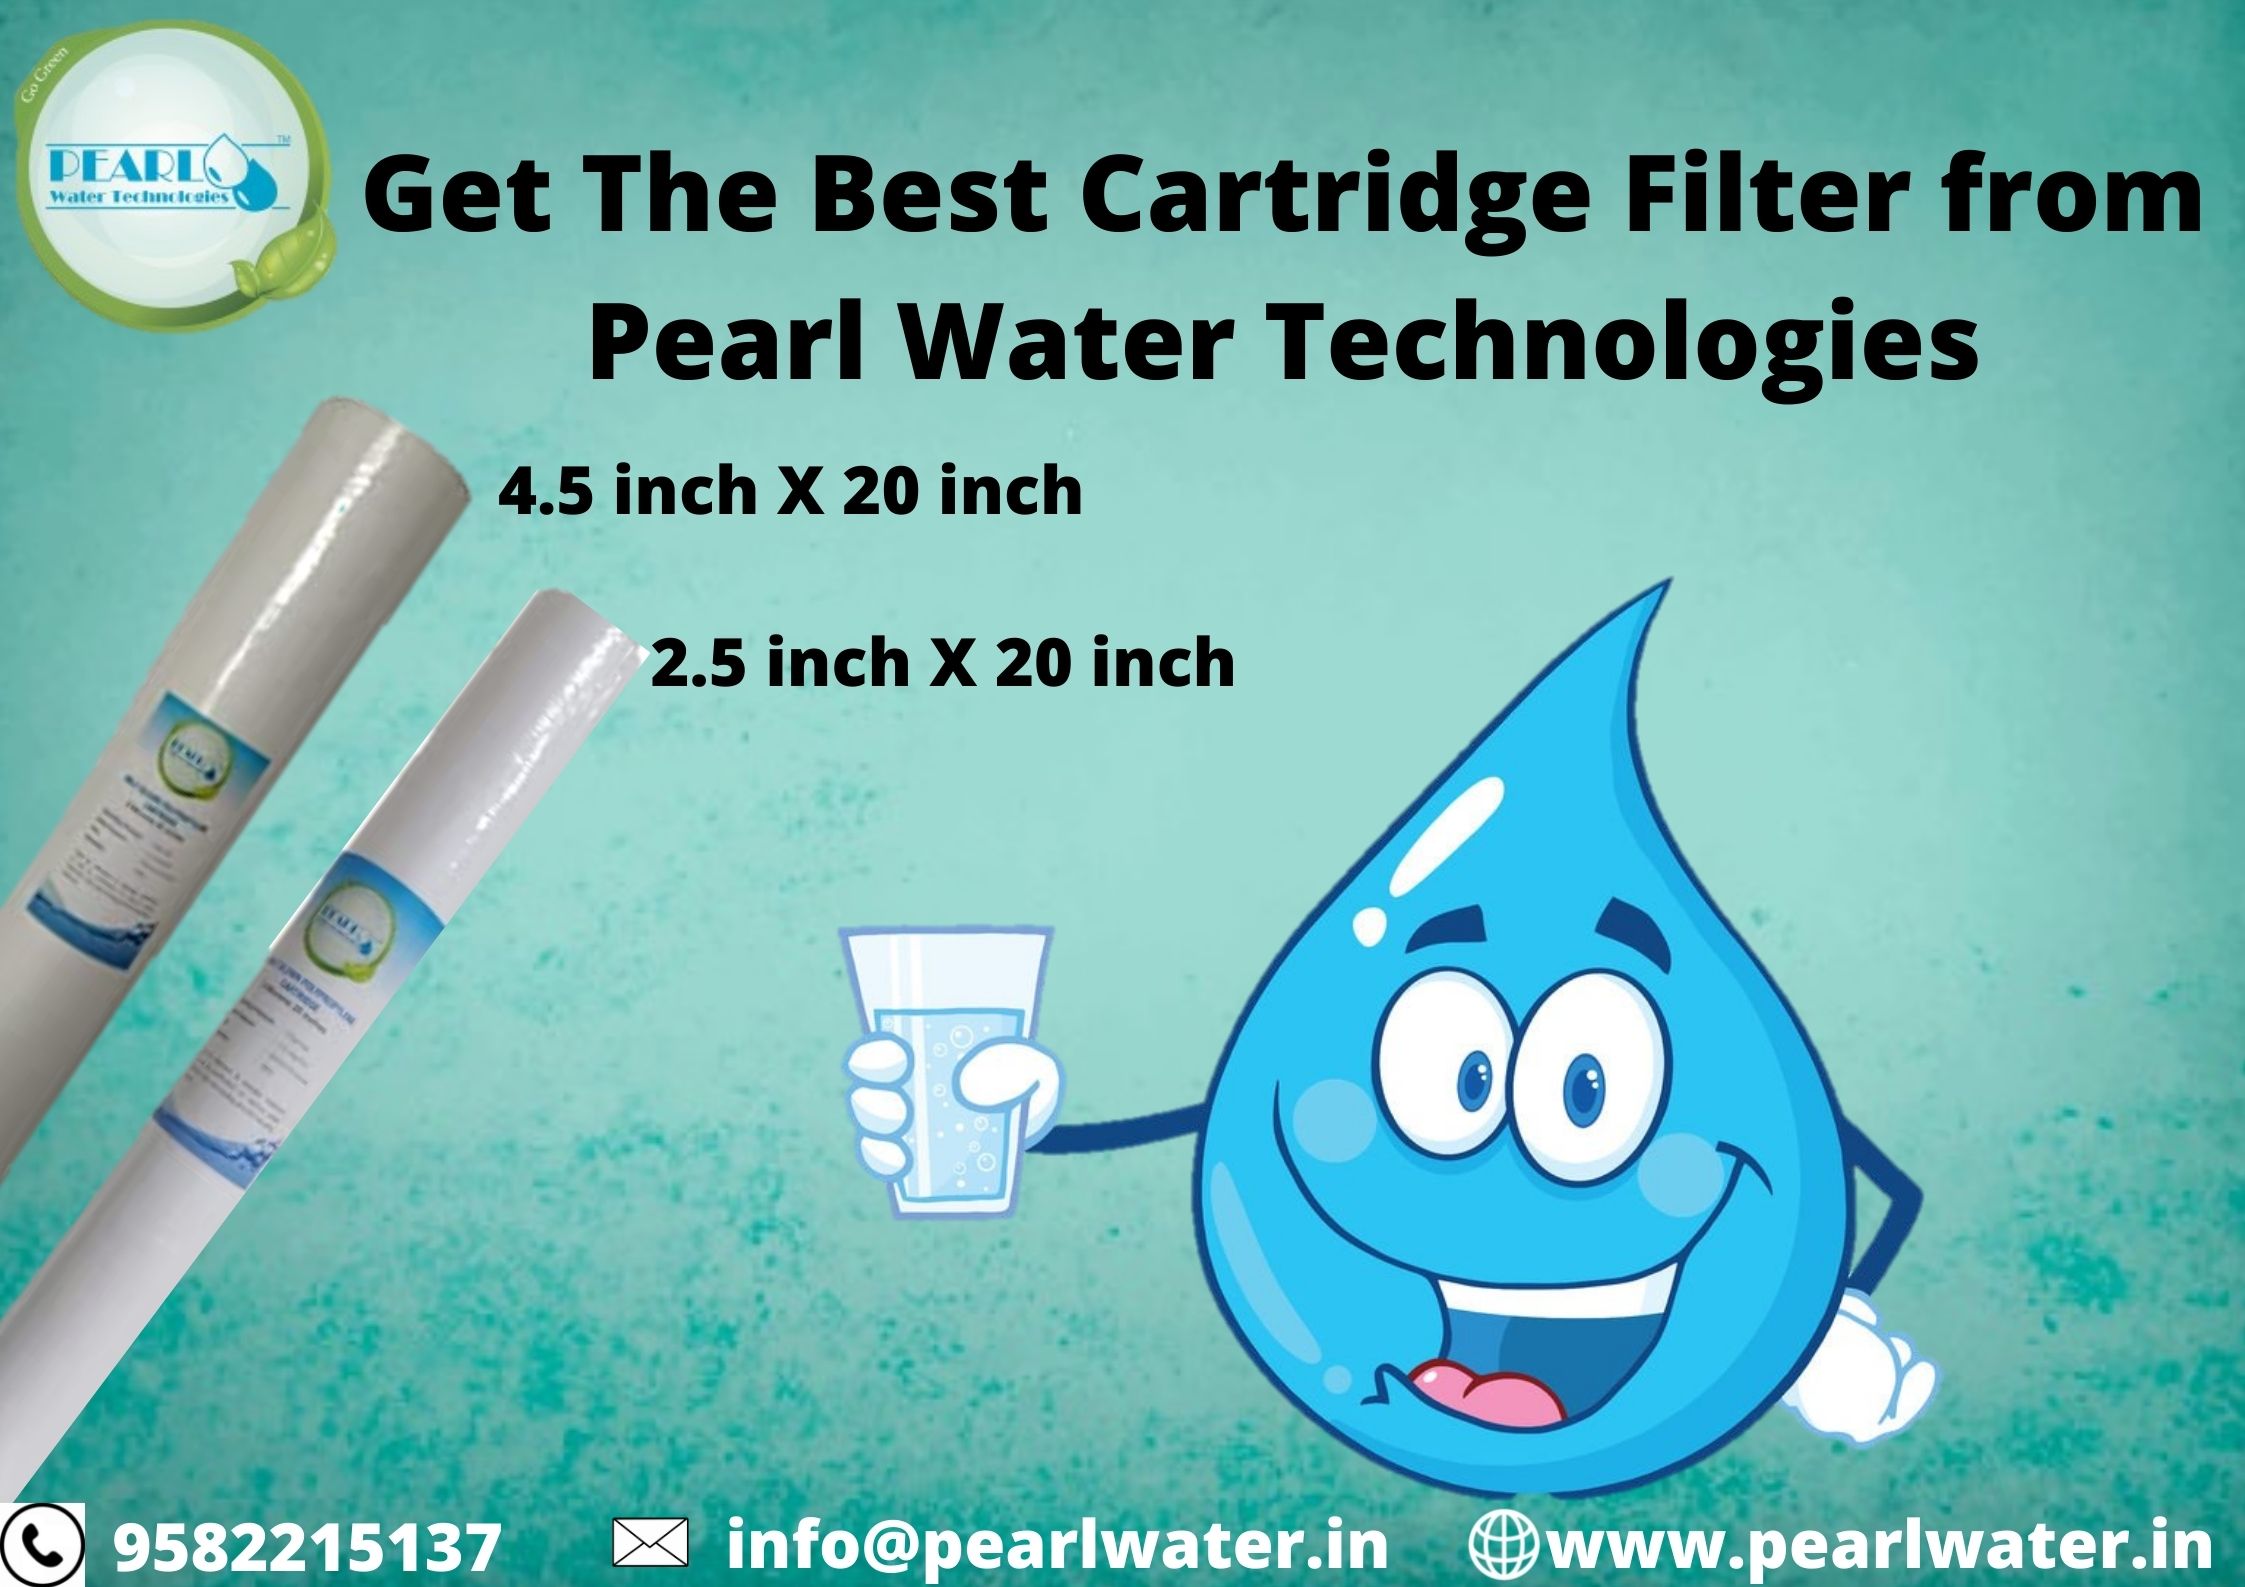 Get the best cartridge filter from pearl water technologies